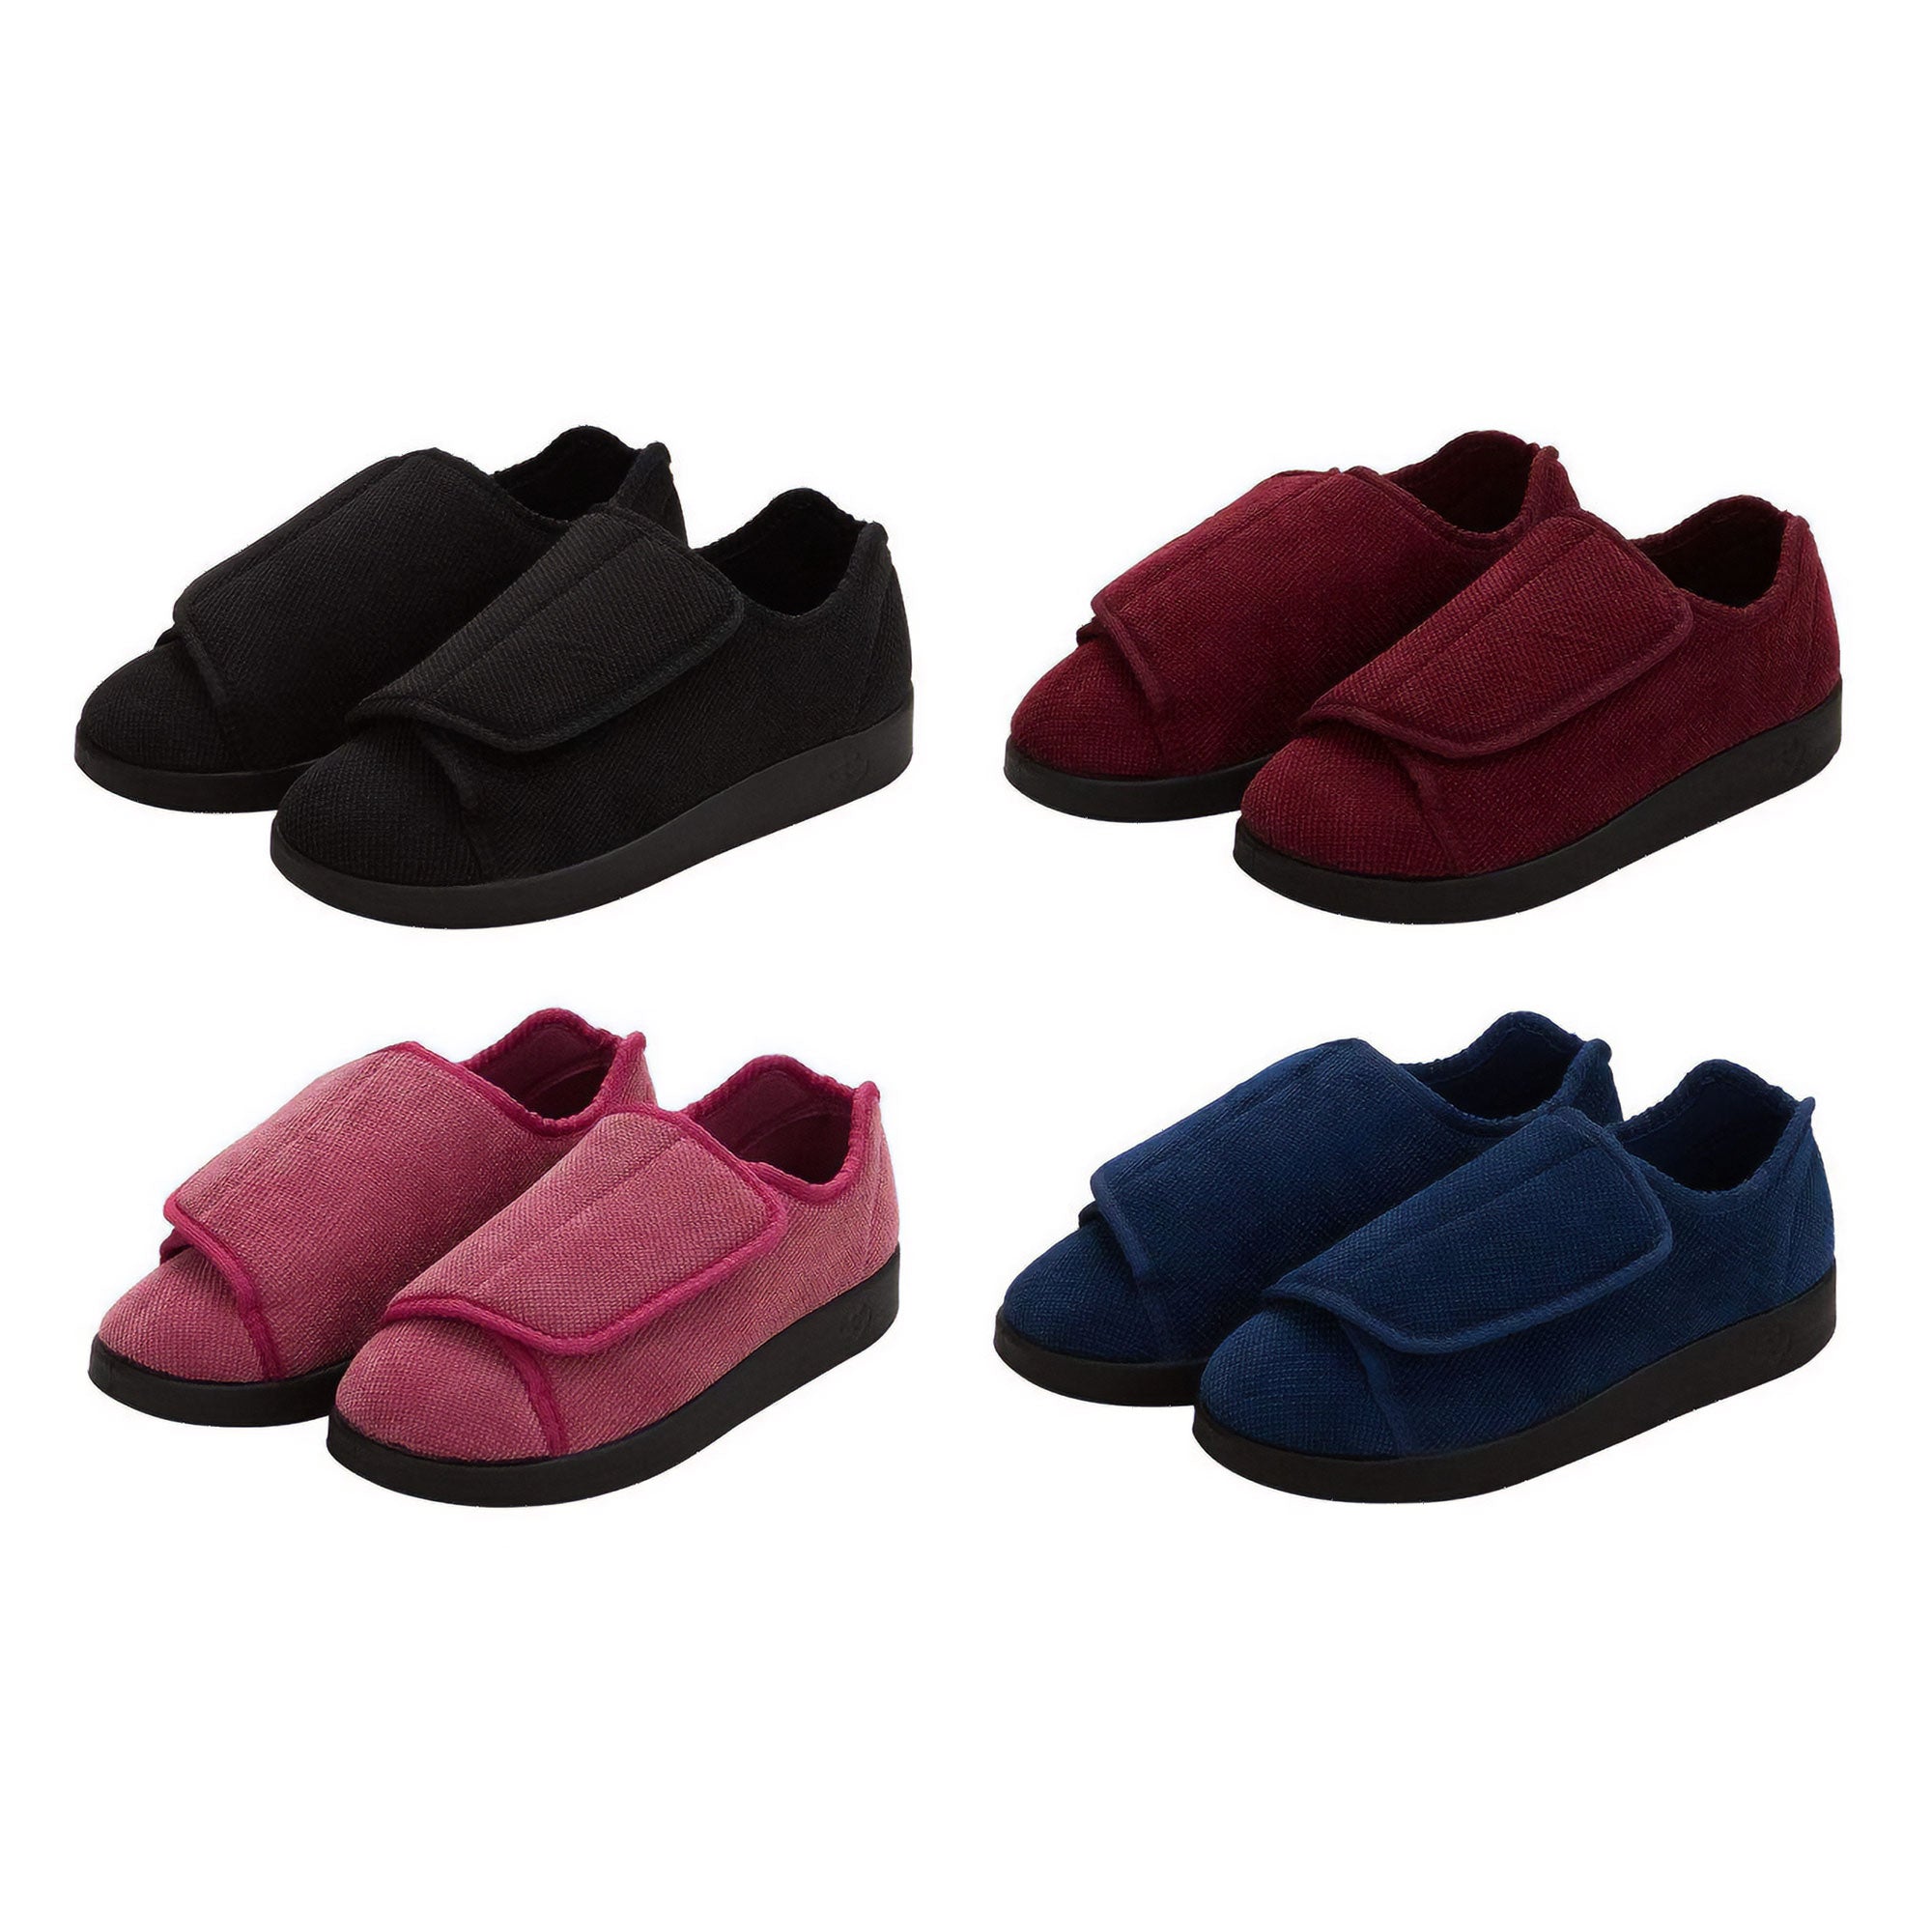 Silverts Women's Antimicrobial Extra Extra Wide Easy-Closure Slippers - Wine - 6